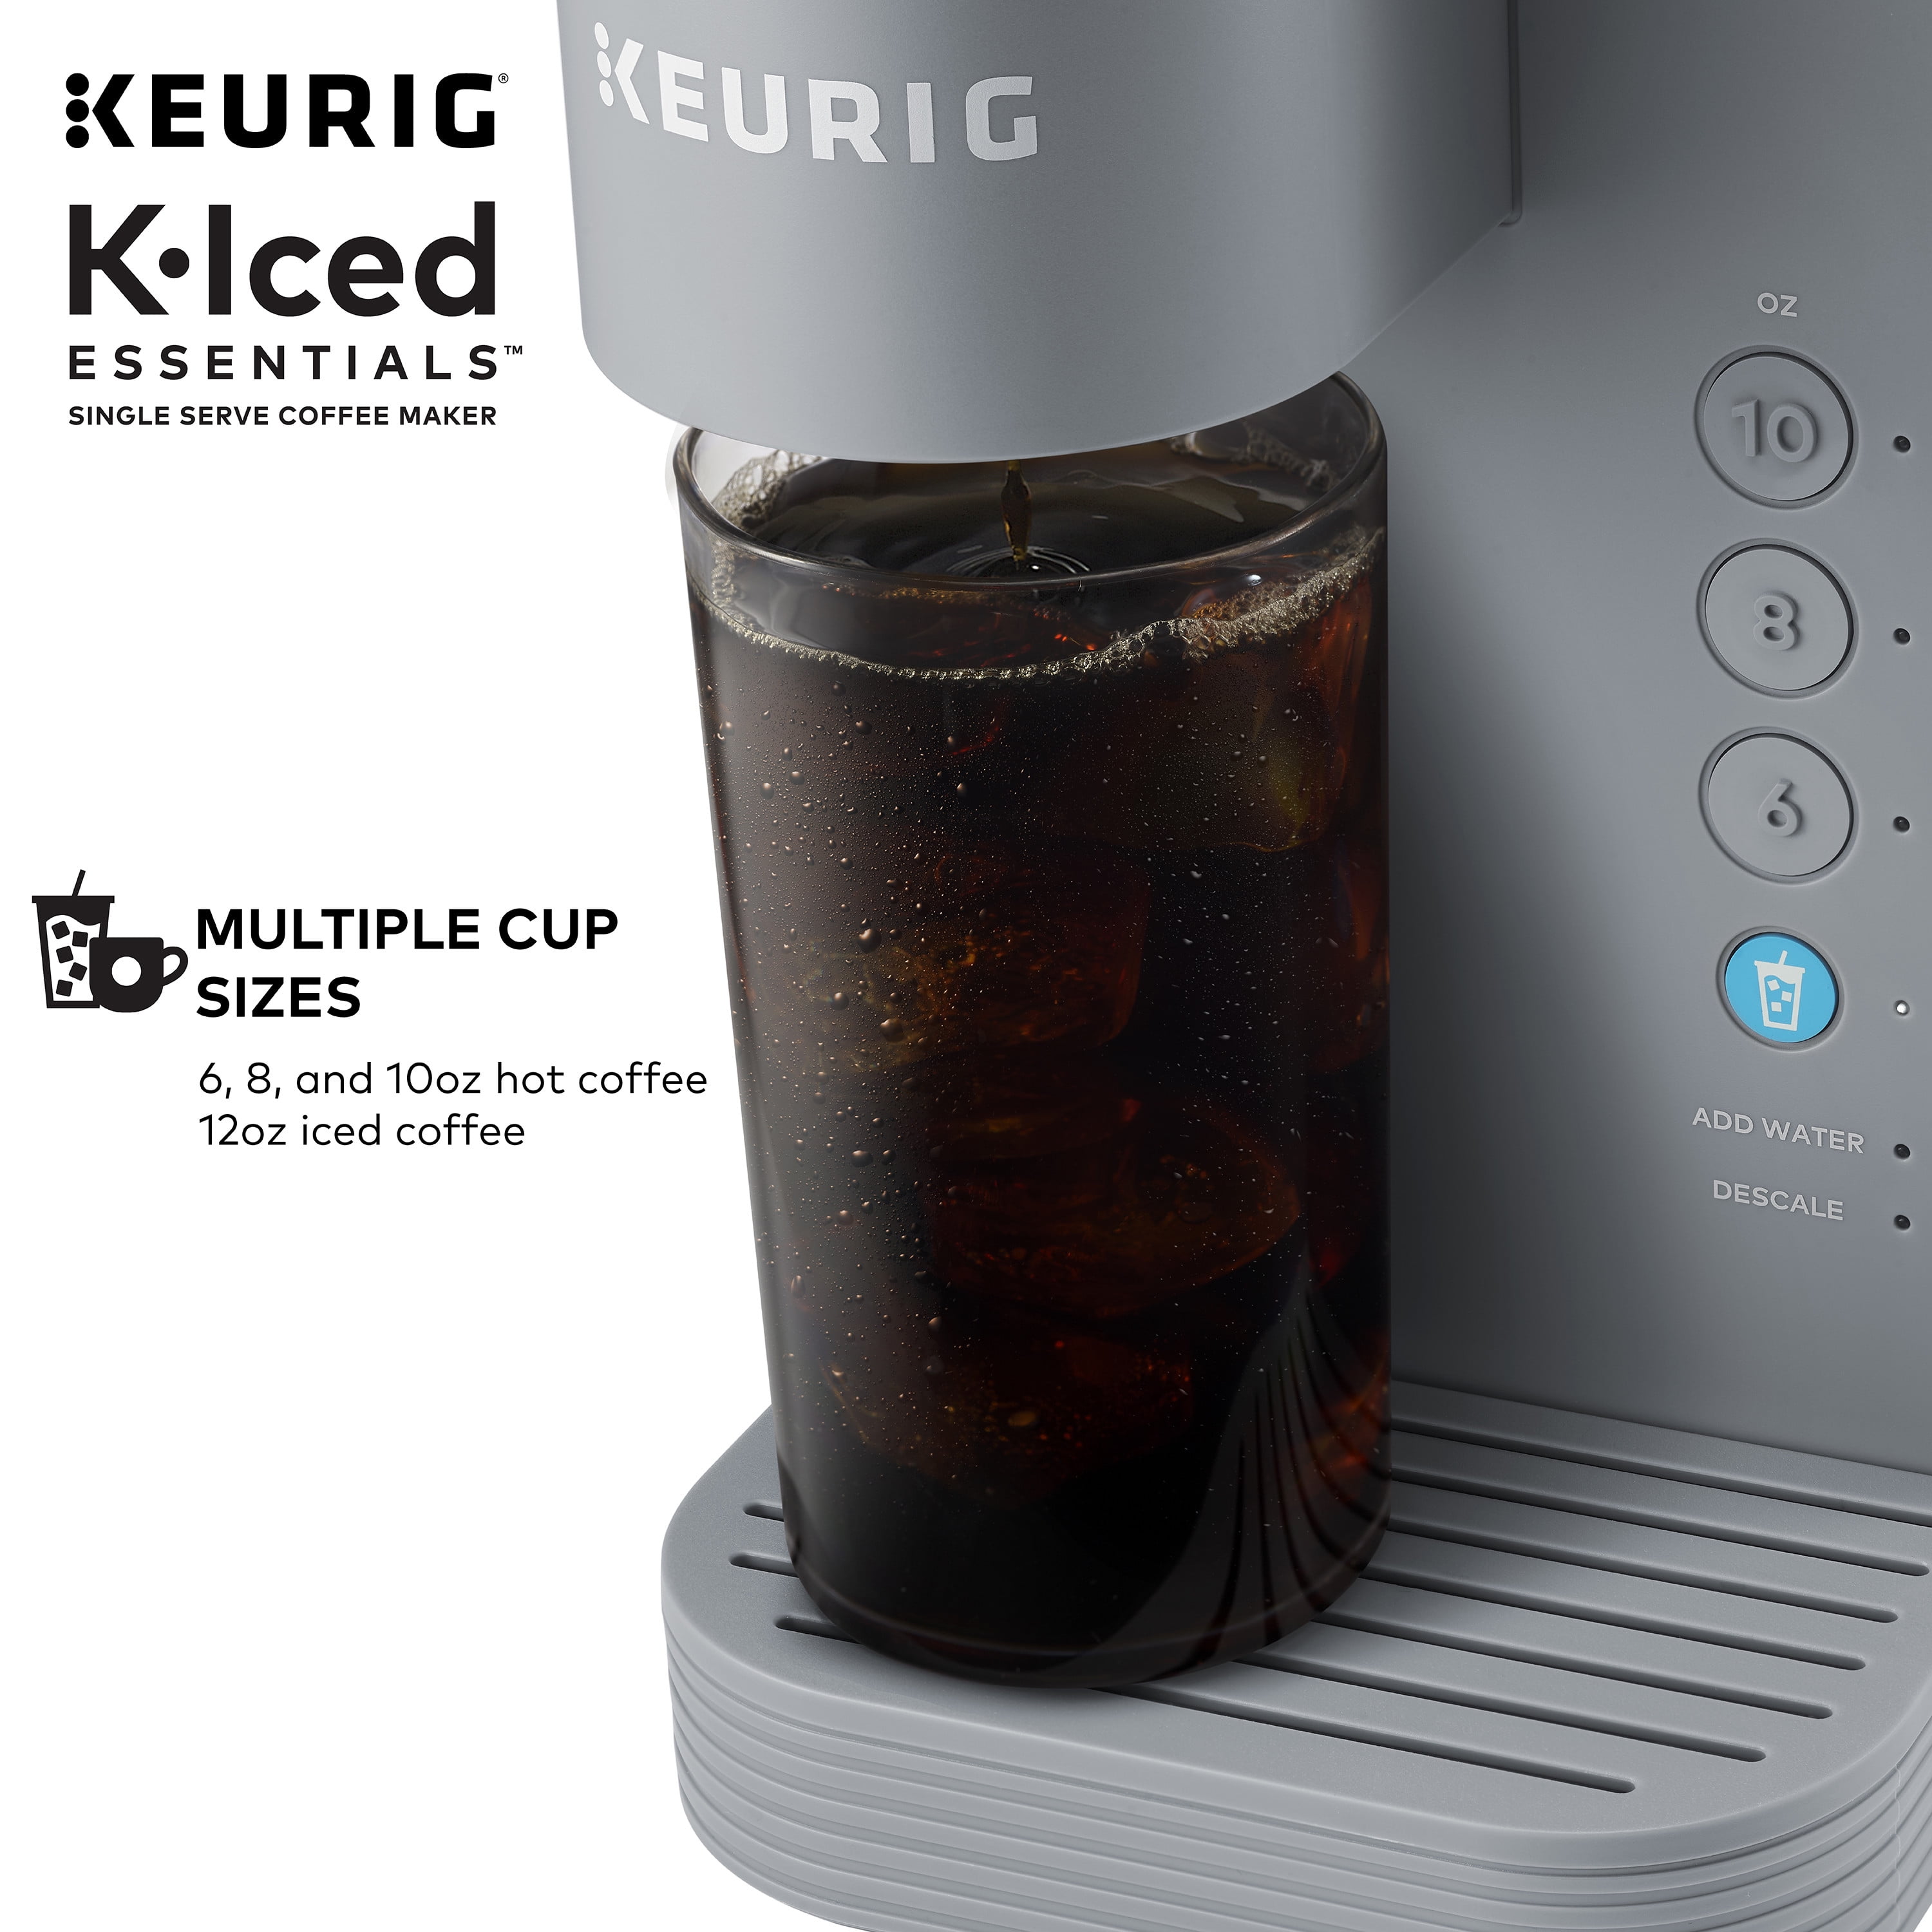 Keurig axes cold-drink machine, offers full refund